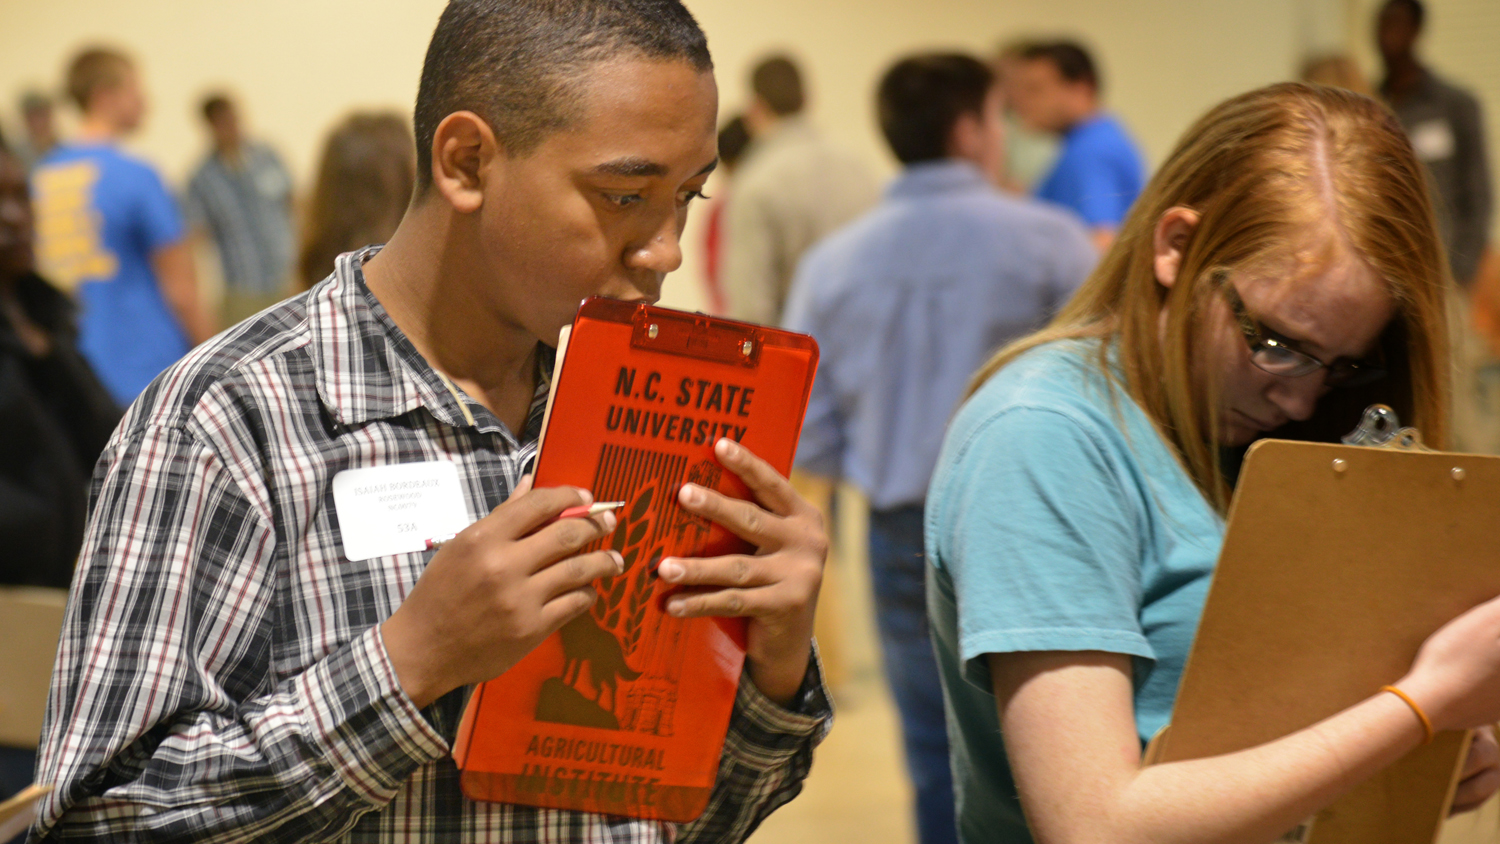 Students holding clipboards during an event.